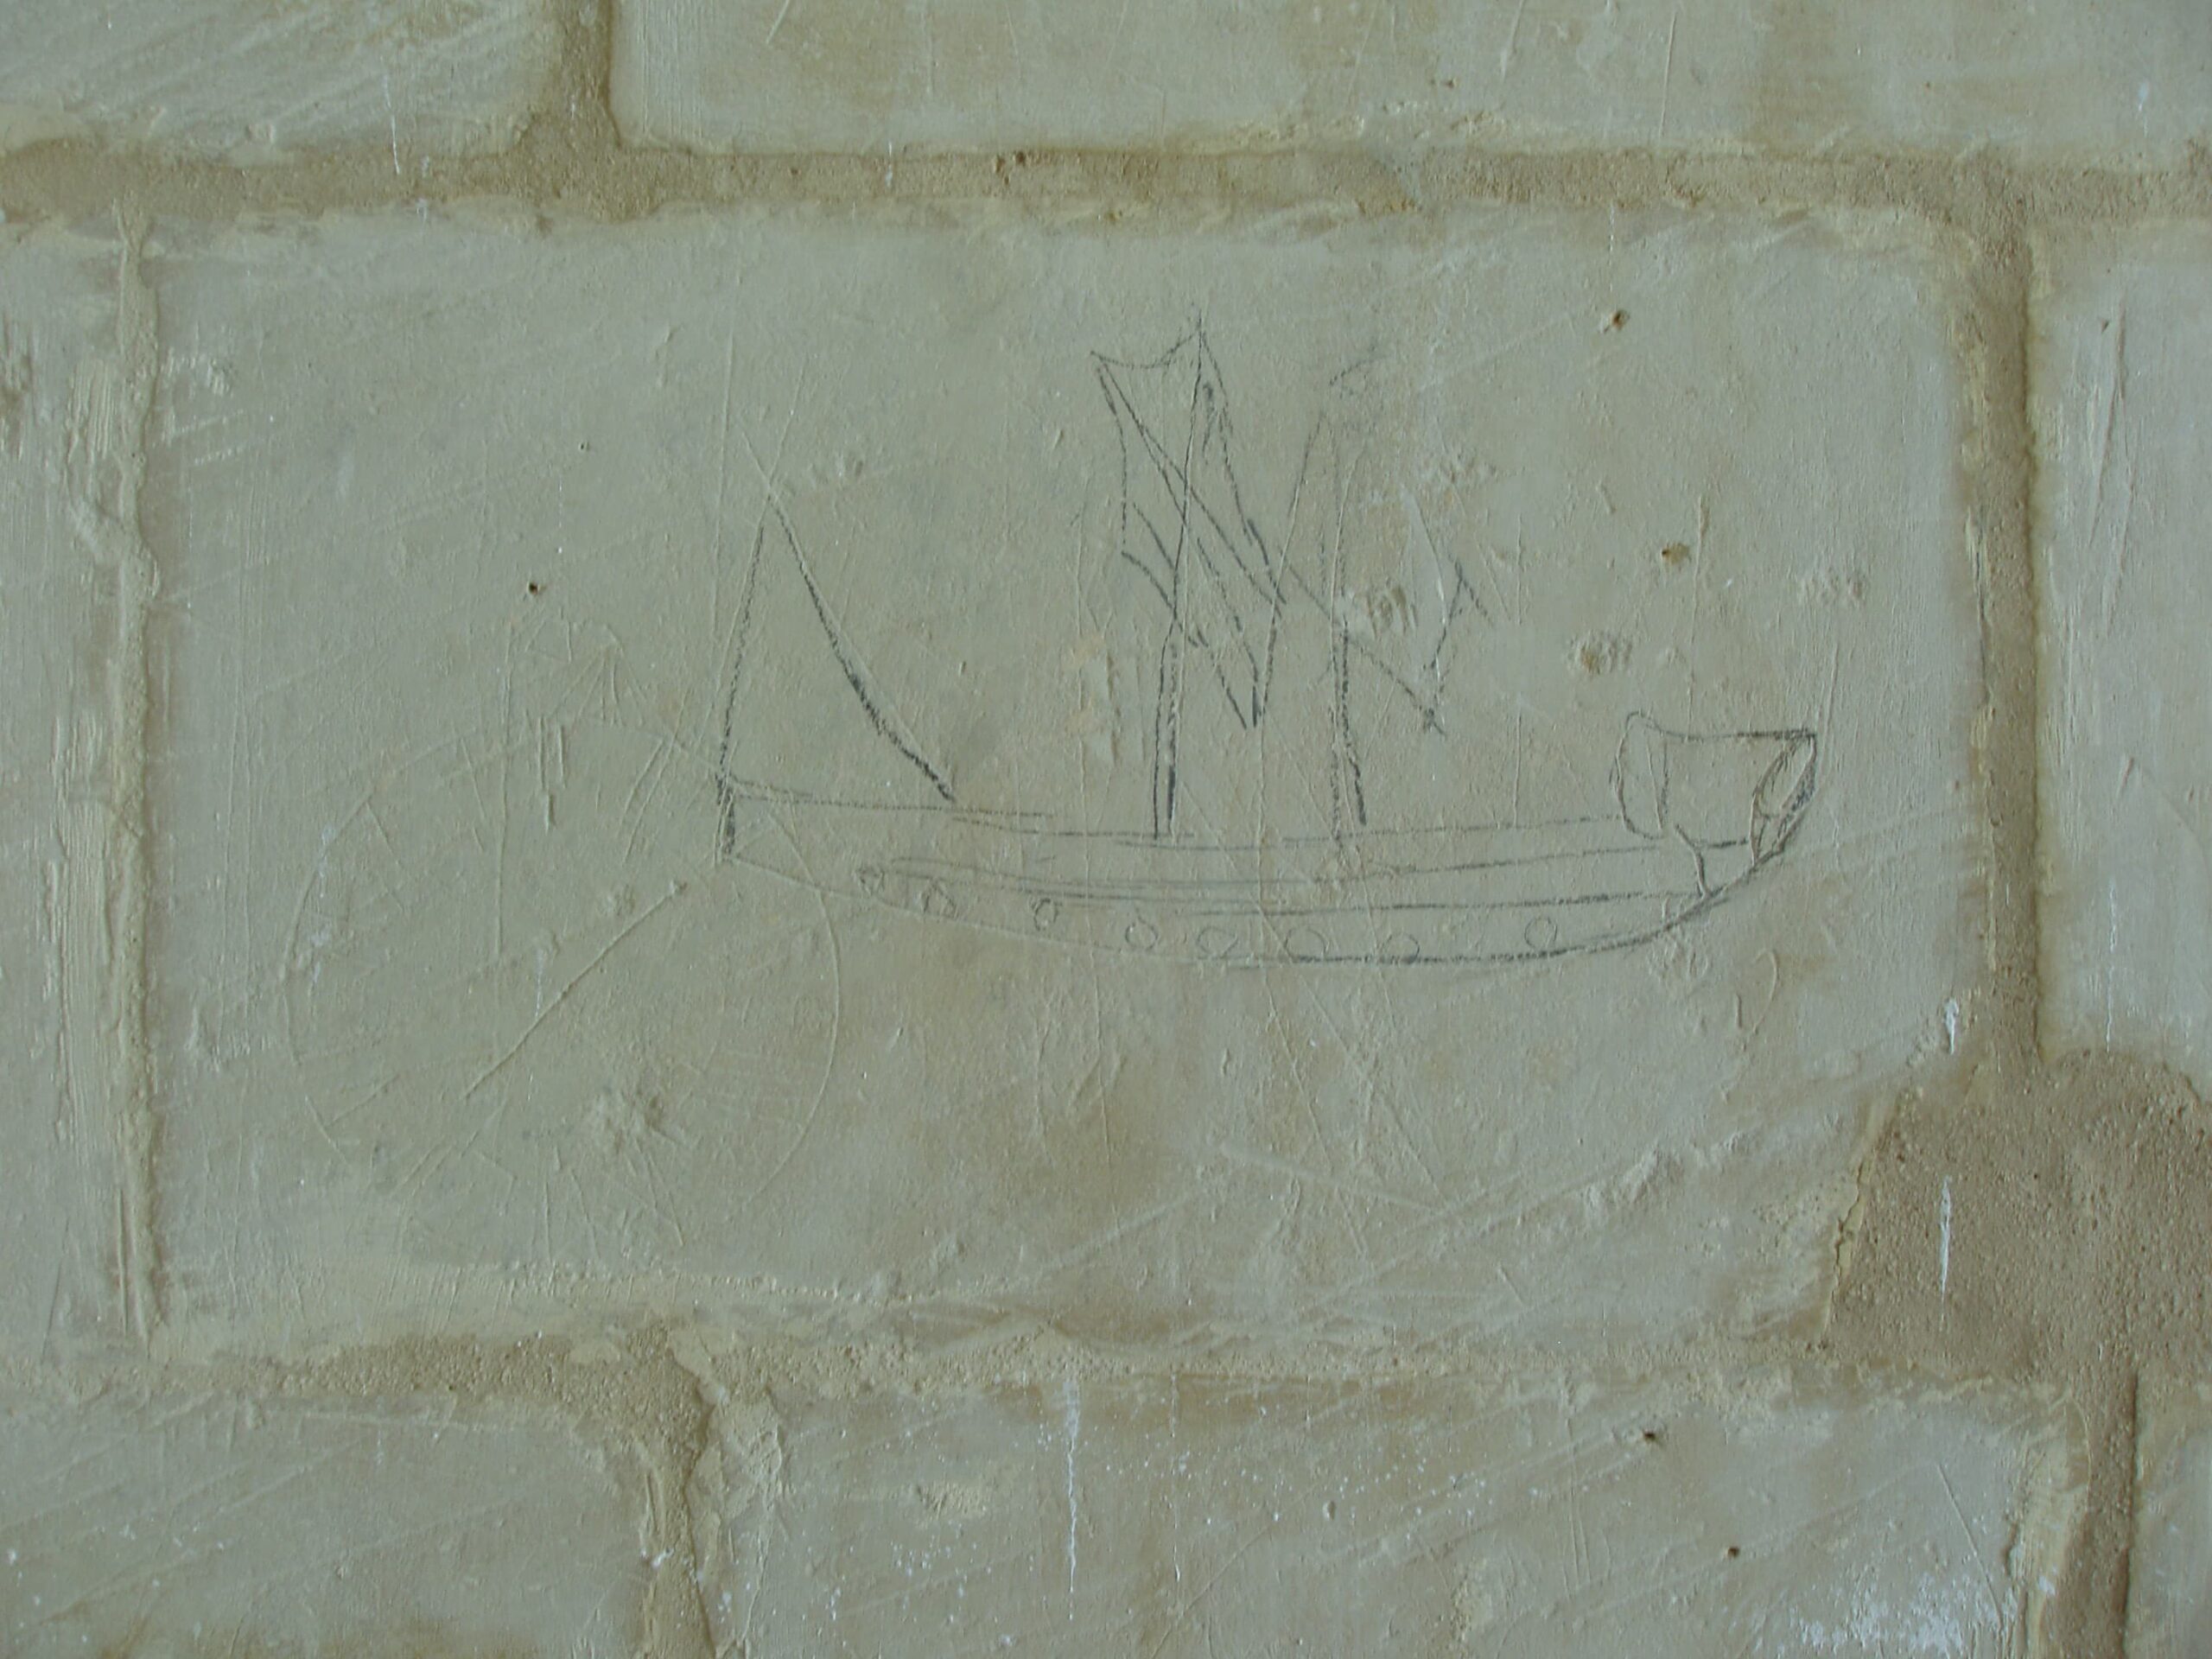 This ship graffito is drawn on the wall with a dark-coloured implement, not etched. The ship’s hull is visible complete with two masts and a mizzen. The typology is difficult to discern.